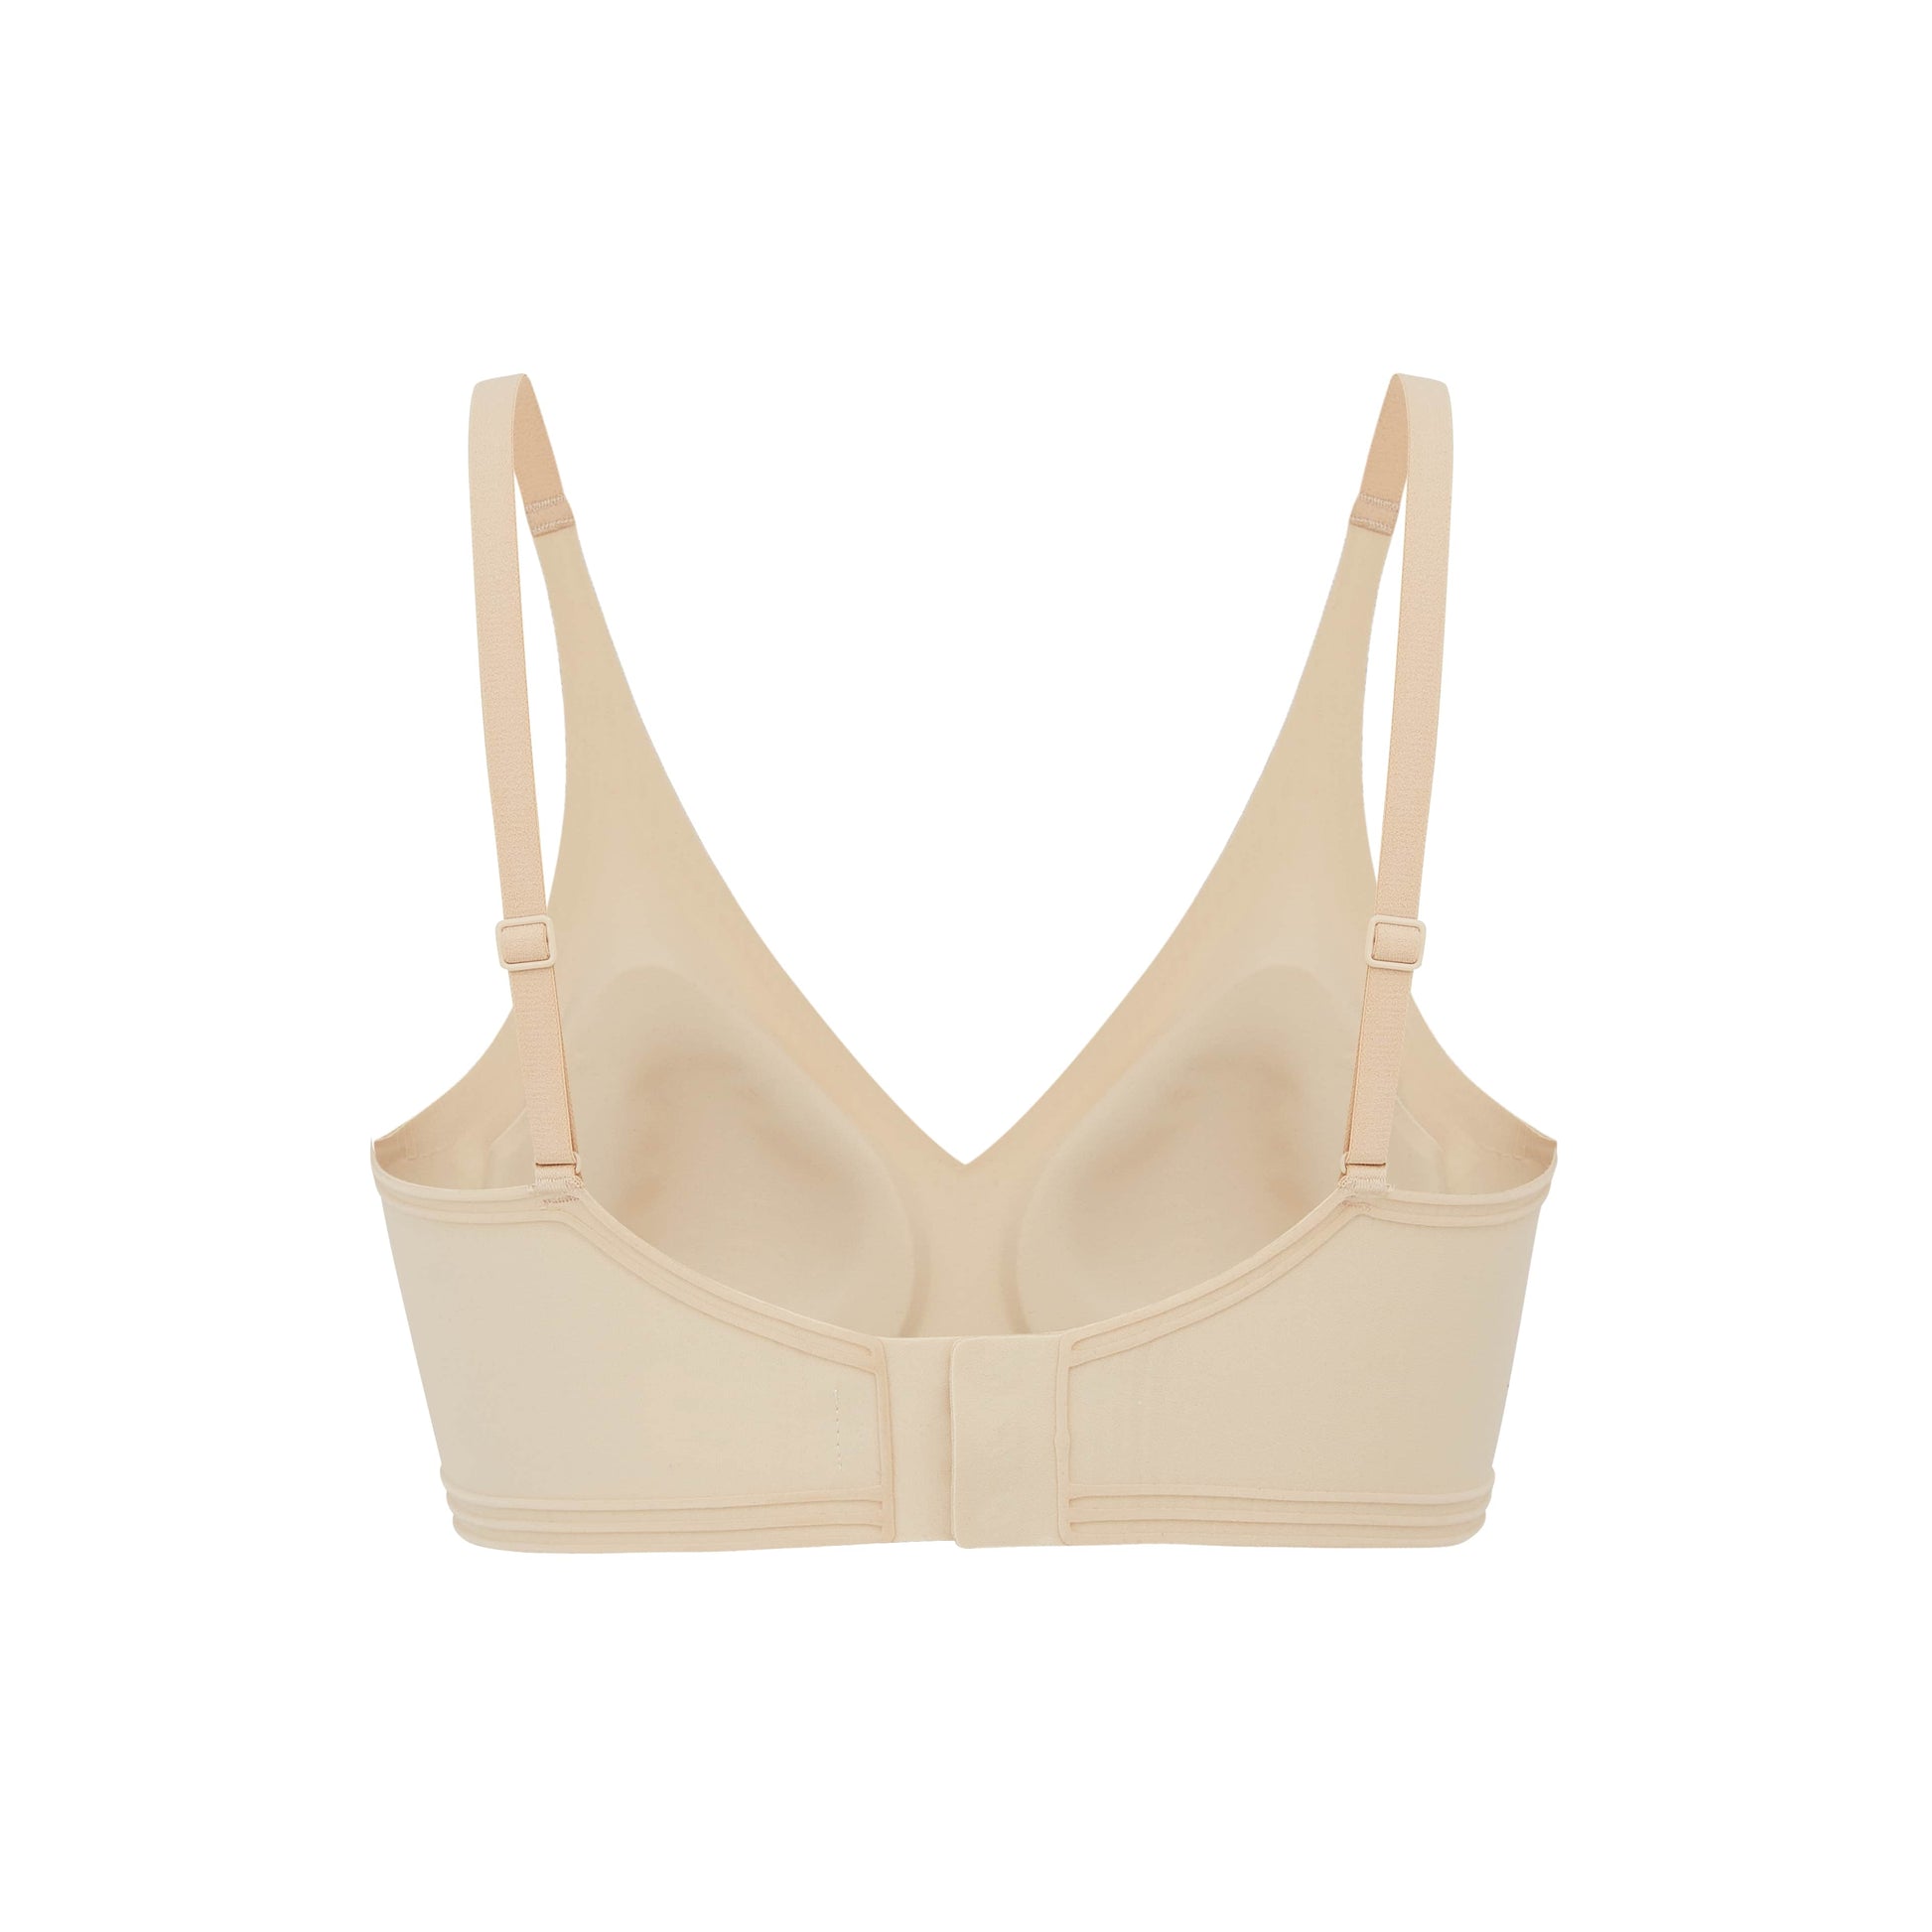 Interior flat lay image of beige bra with plunge neckline and back clasp